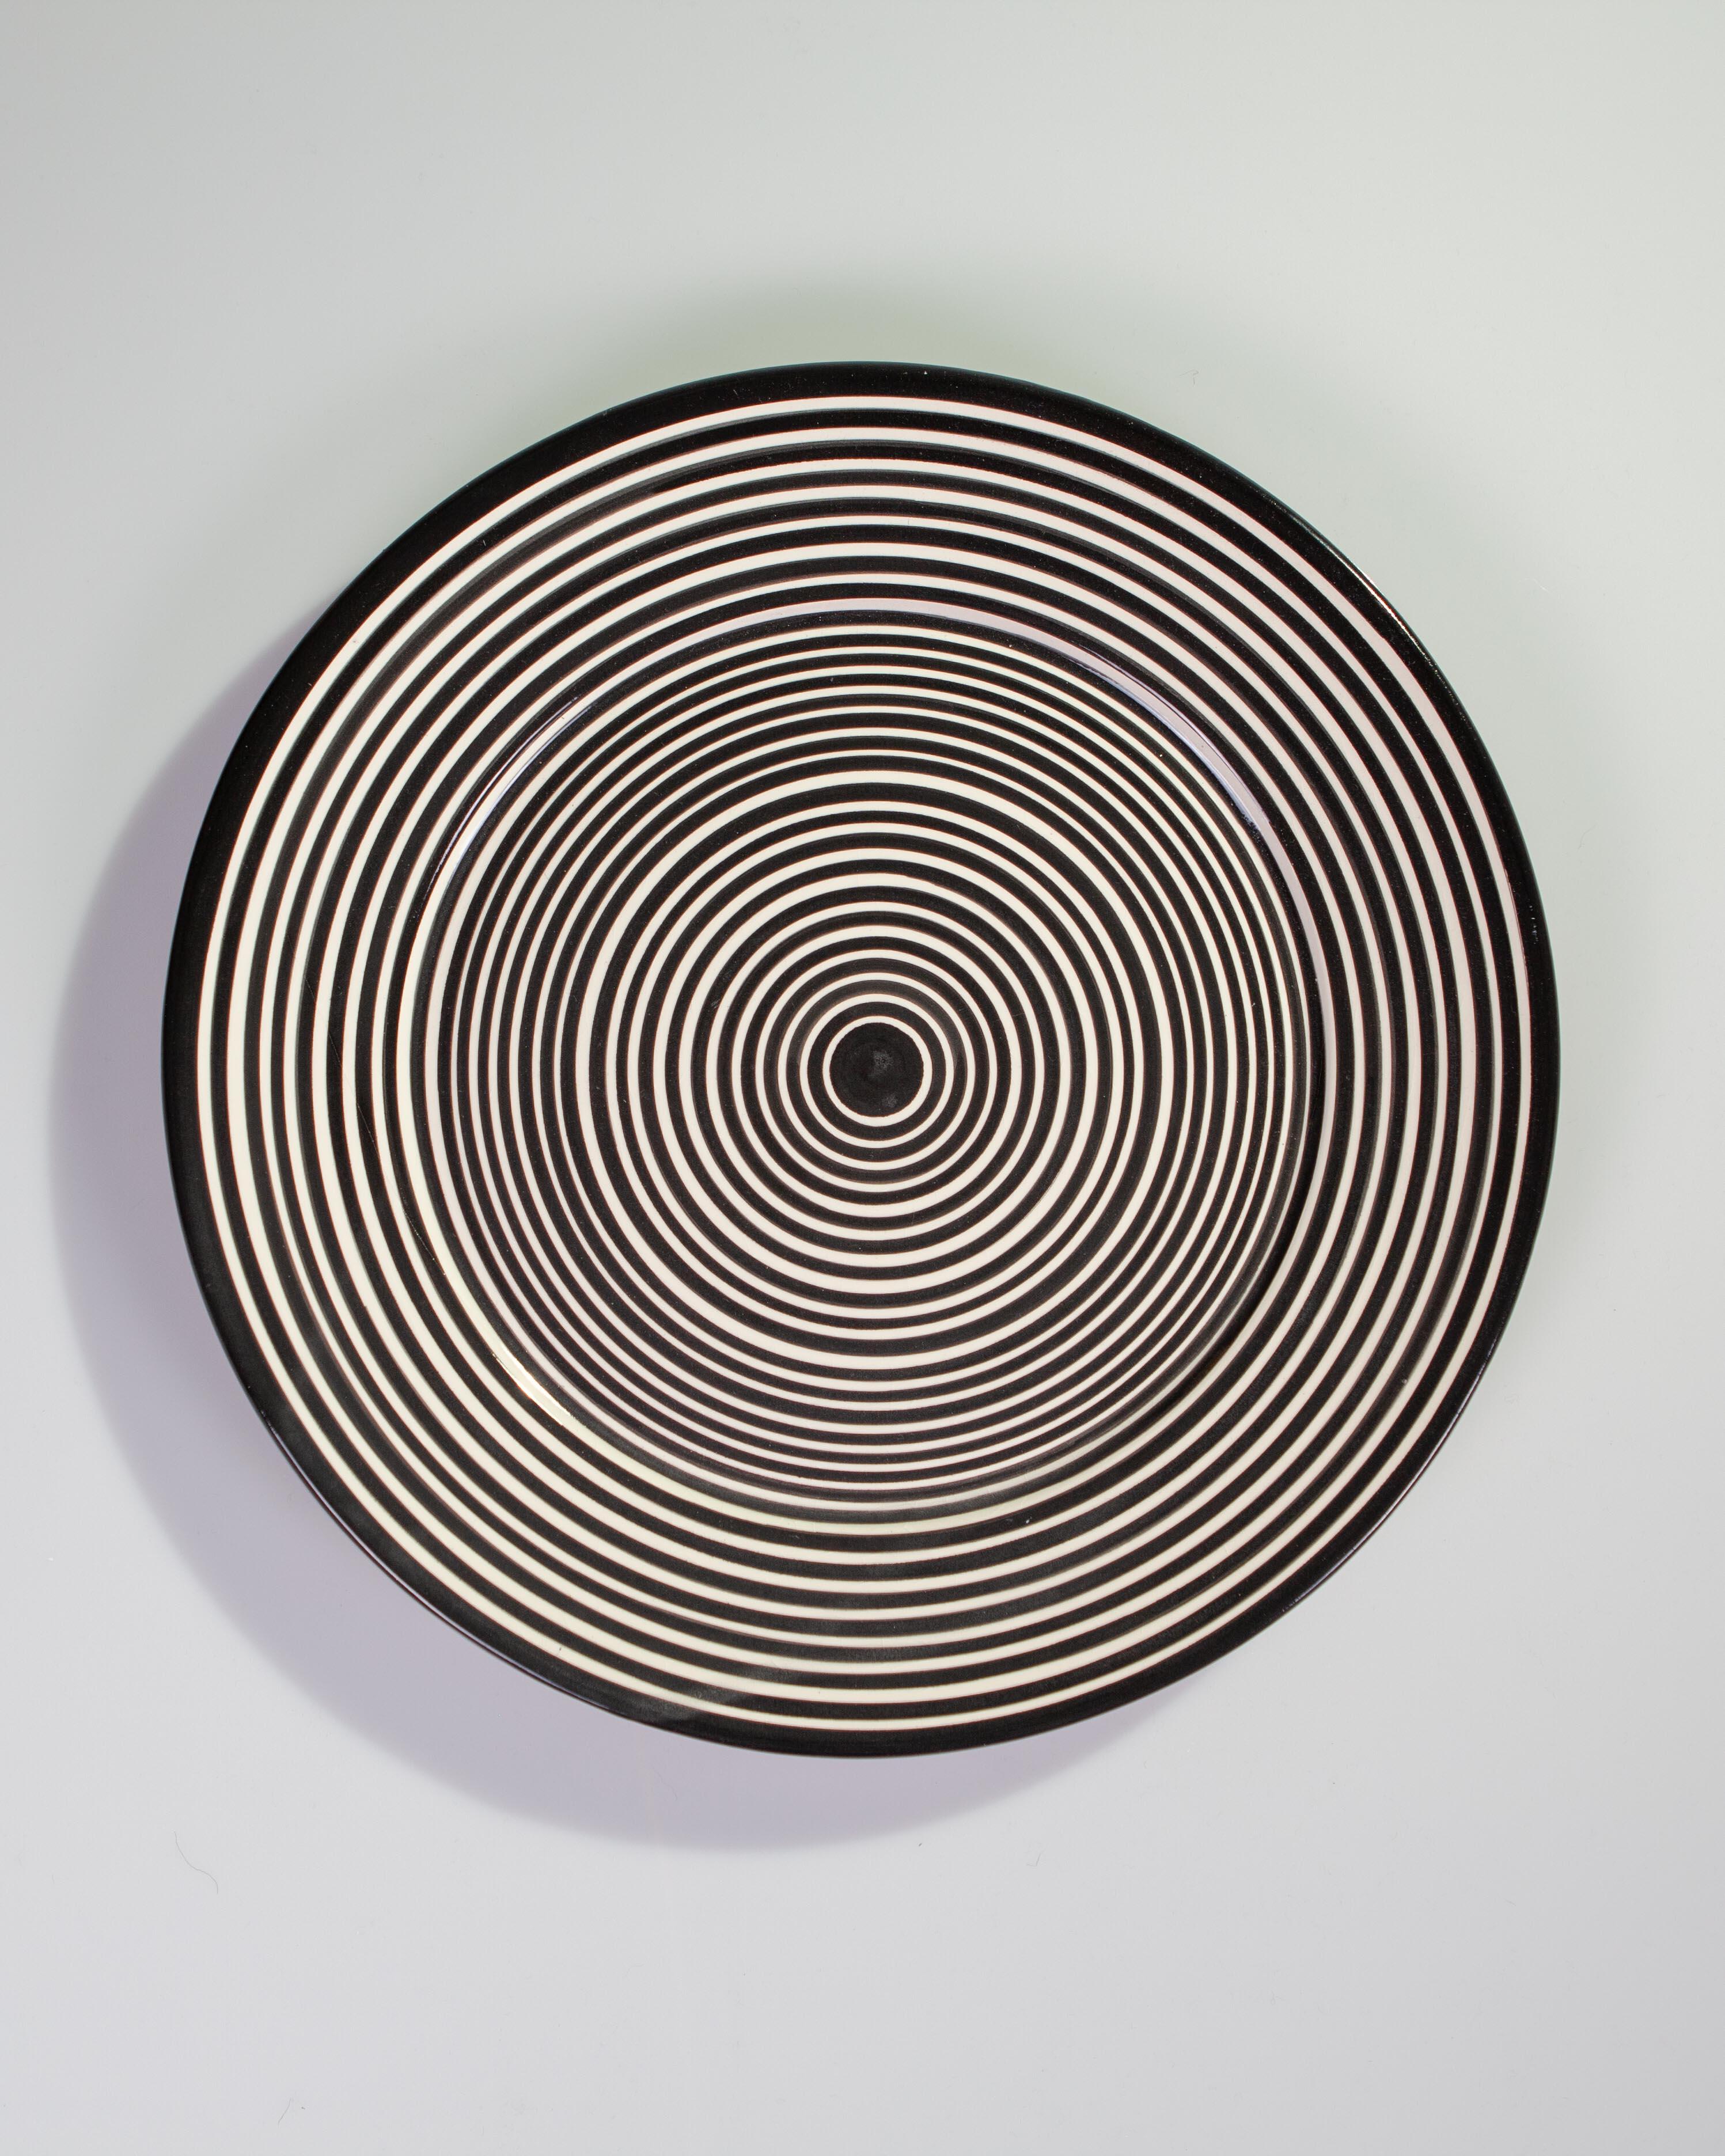 Portuguese Handmade Ceramic Stripped Platter with Graphic Black and White Design, in Stock For Sale